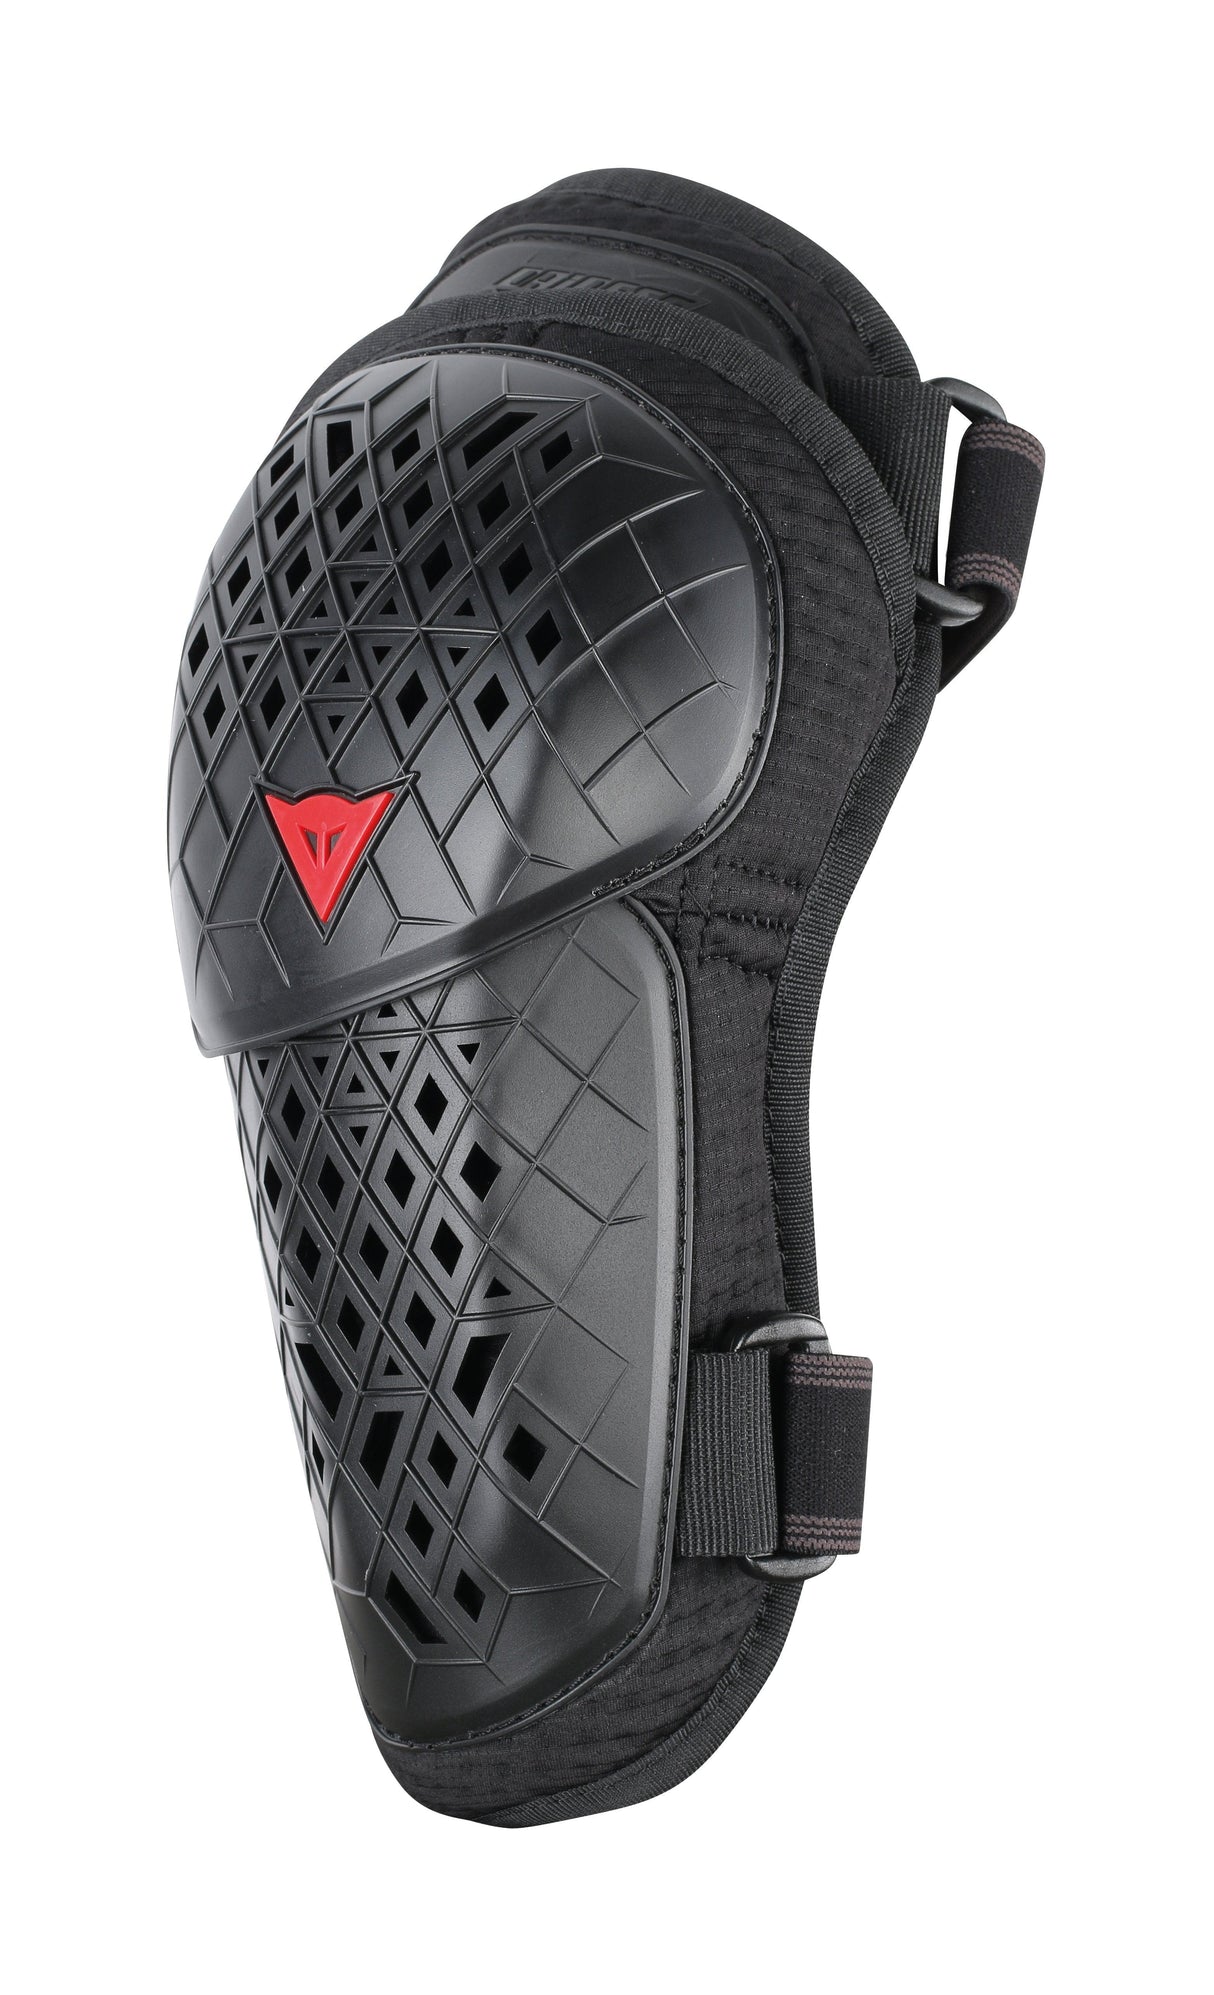 Dainese Armoform Elbow Guard Lite (S)